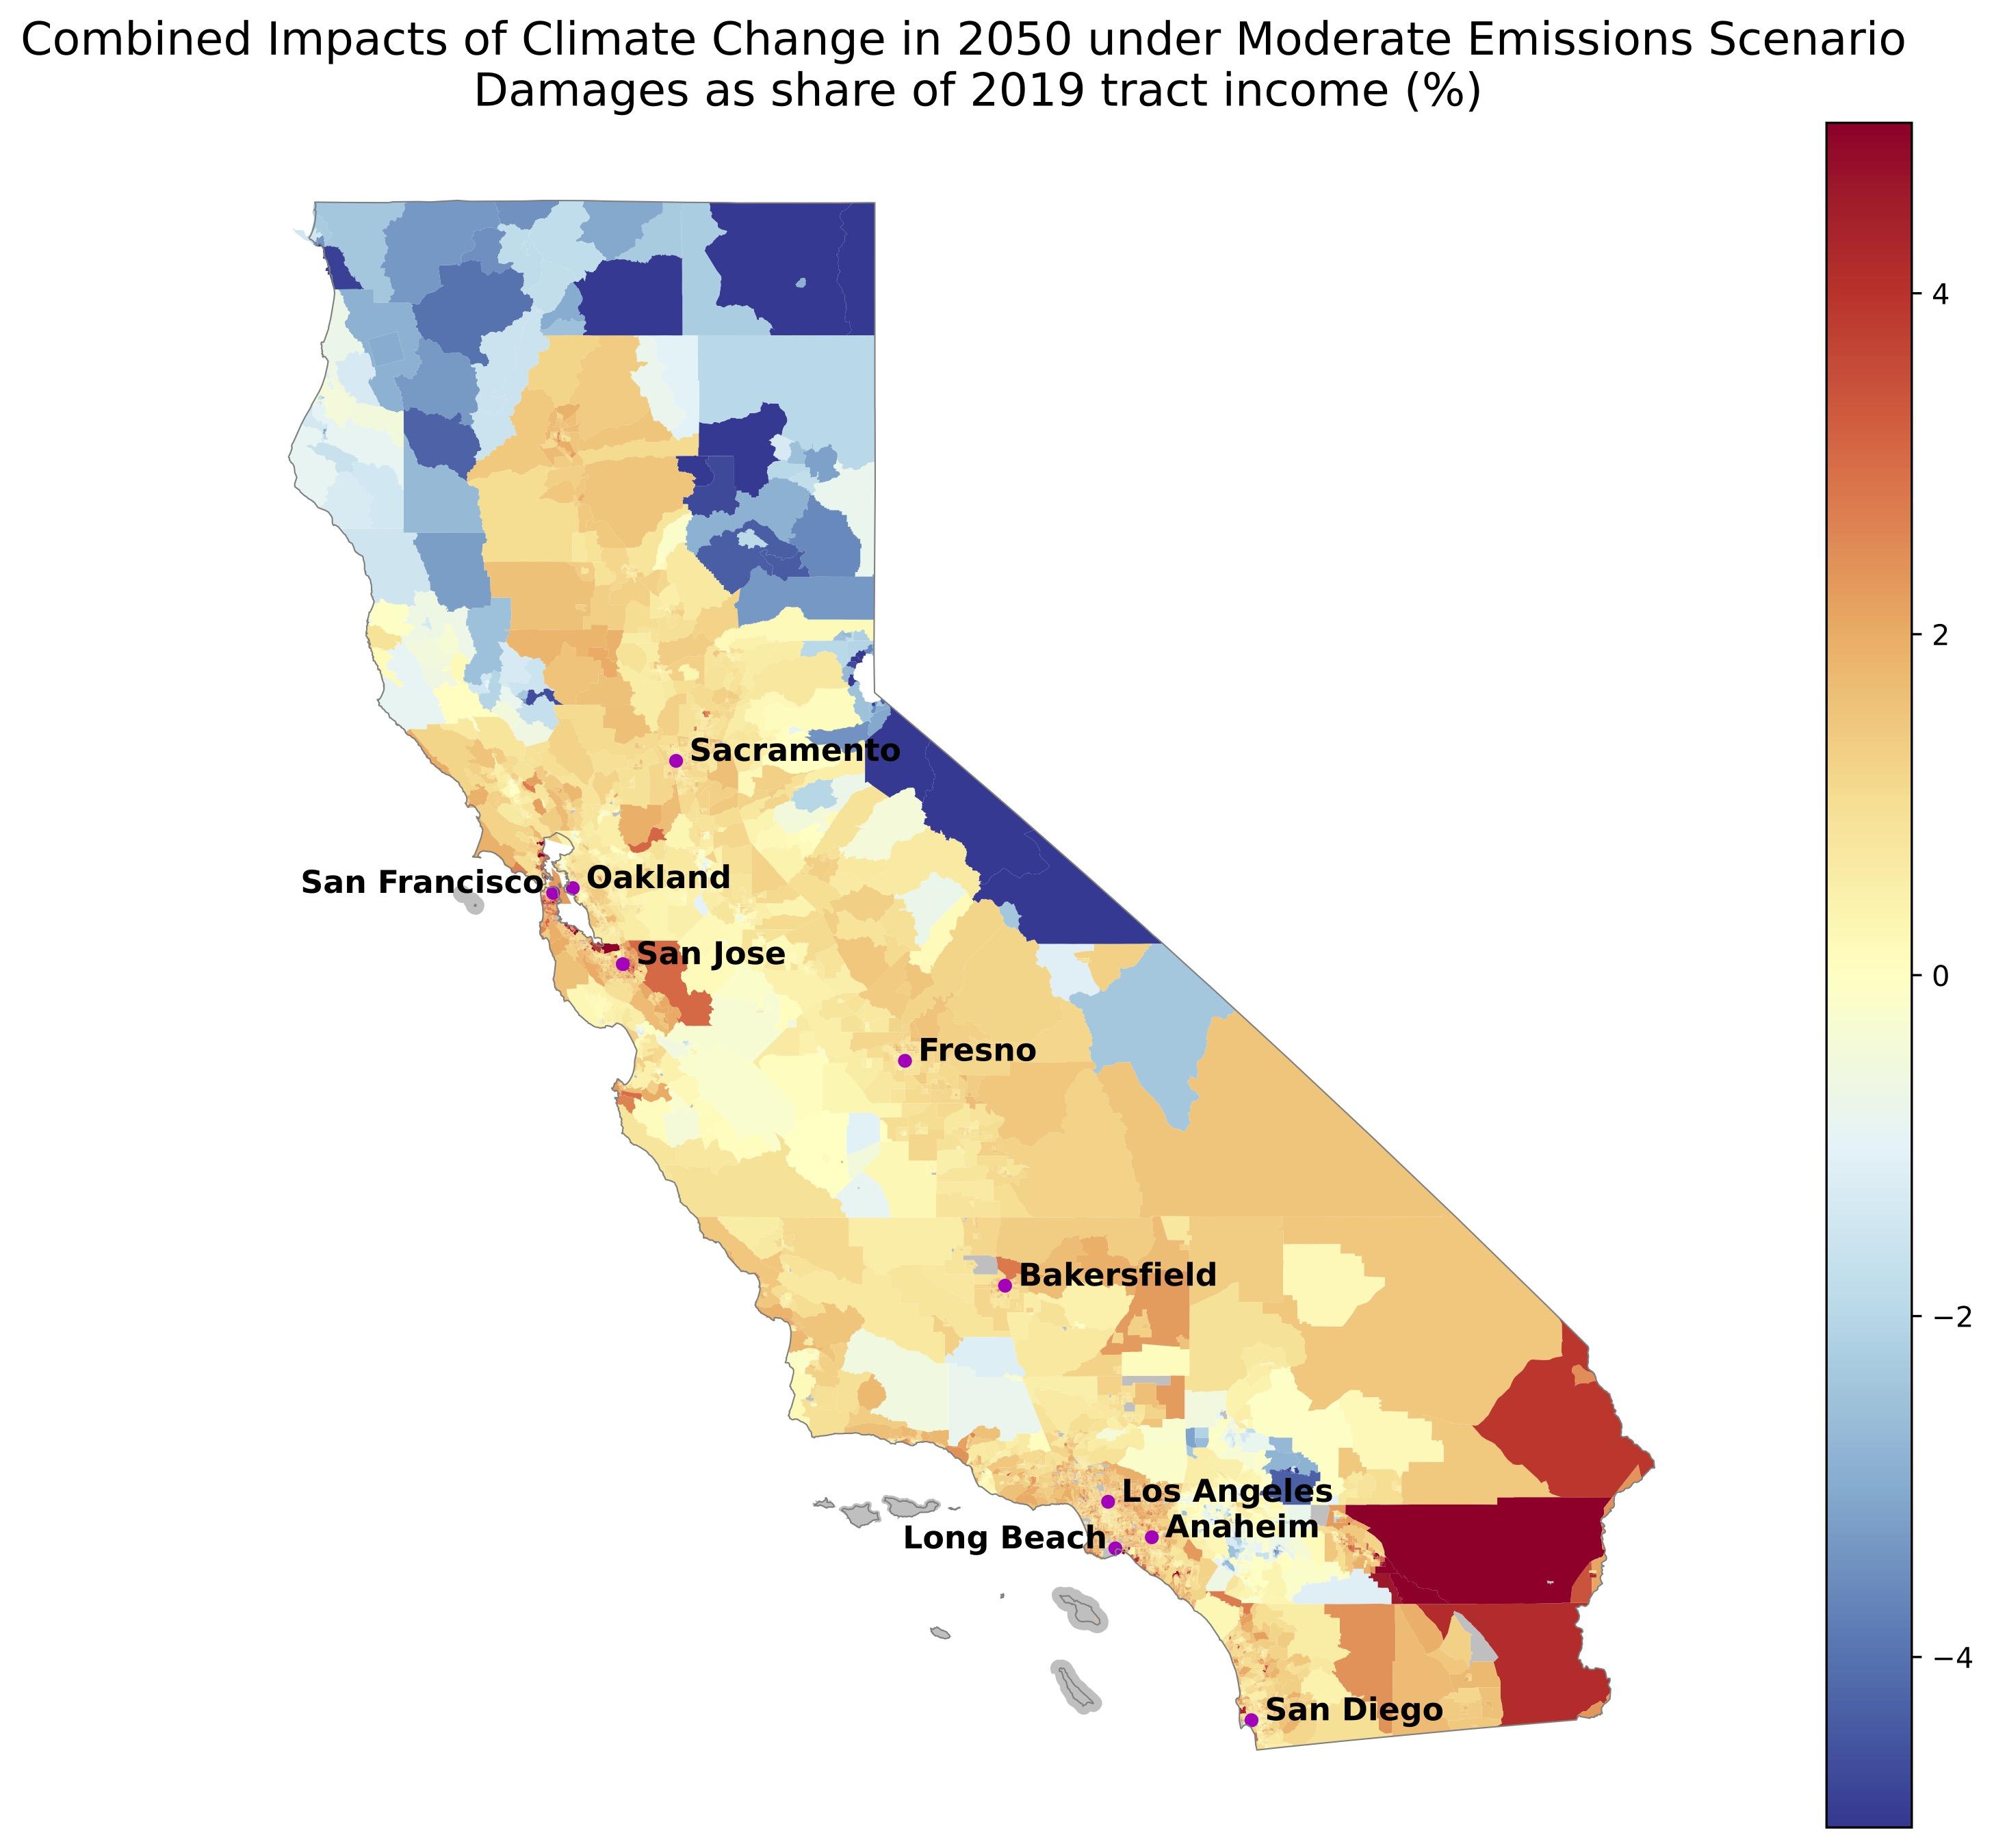 map of california displaying the climate vulnerability metric, which is reported as damages as a share of 2019 income 